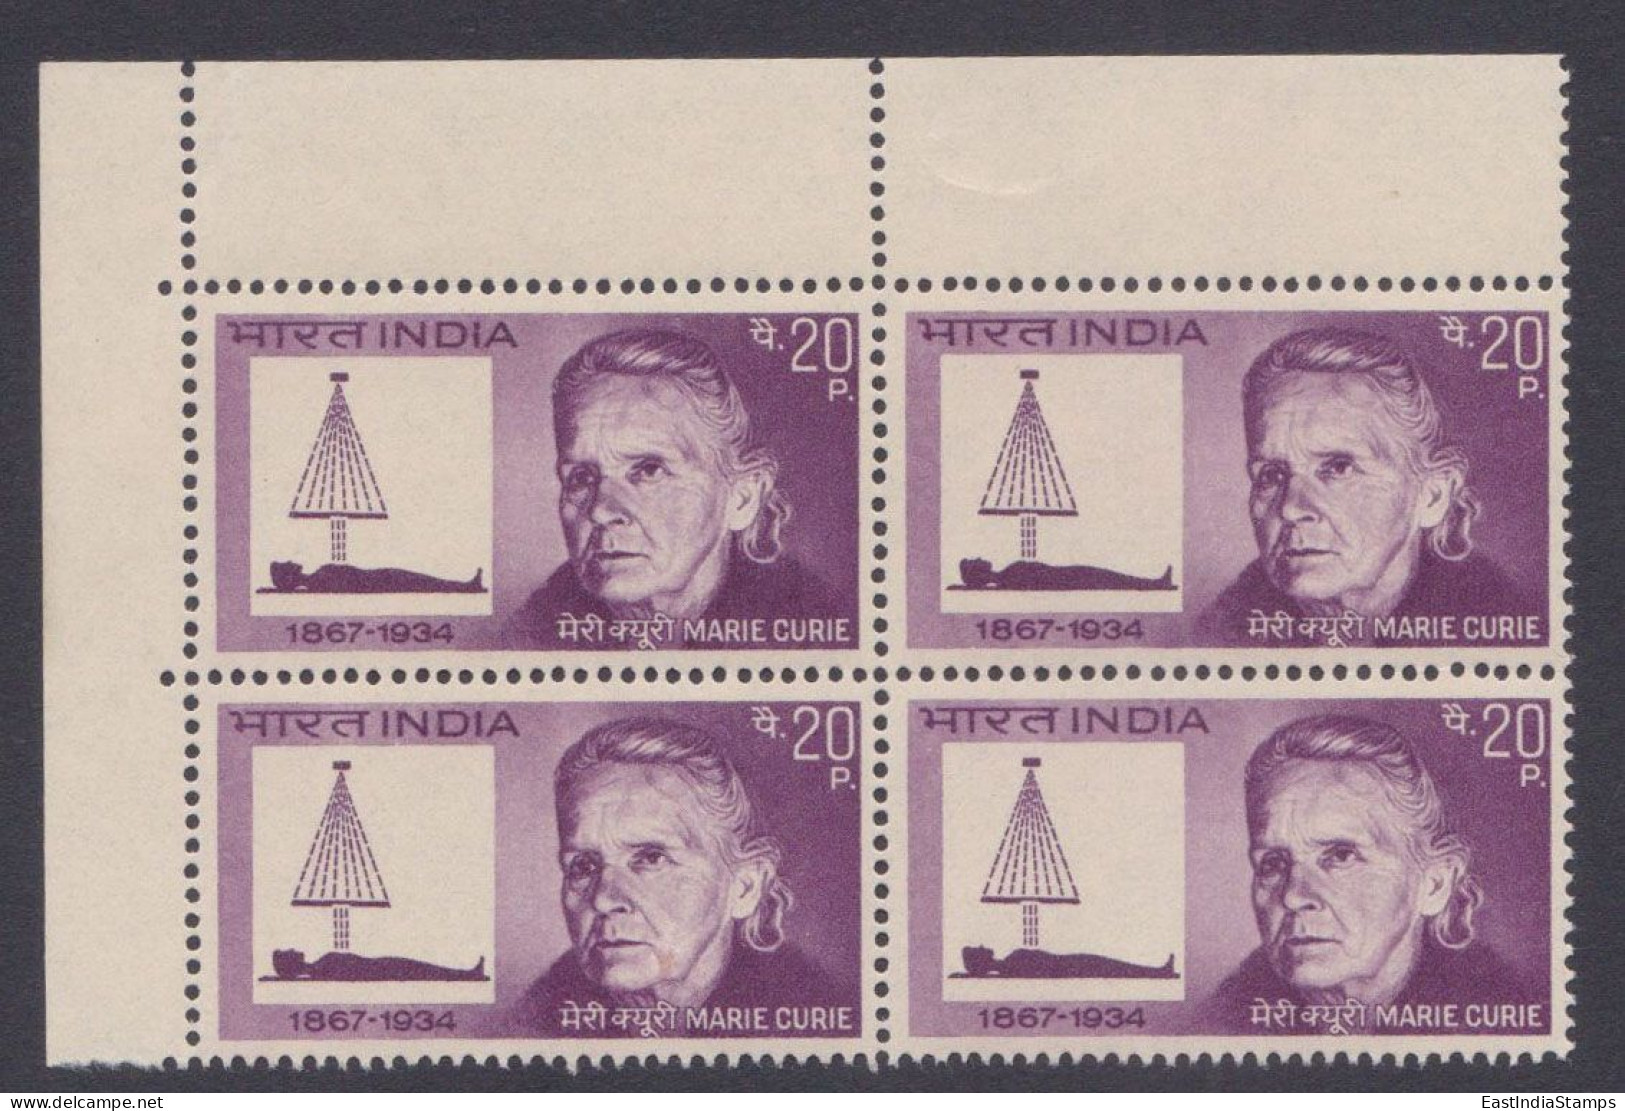 Inde India 1968 MNH Marie Curie, Polish French Chemist, Physicist, Nobel Prize Winner, Science, Scientist, Physics Block - Nuevos